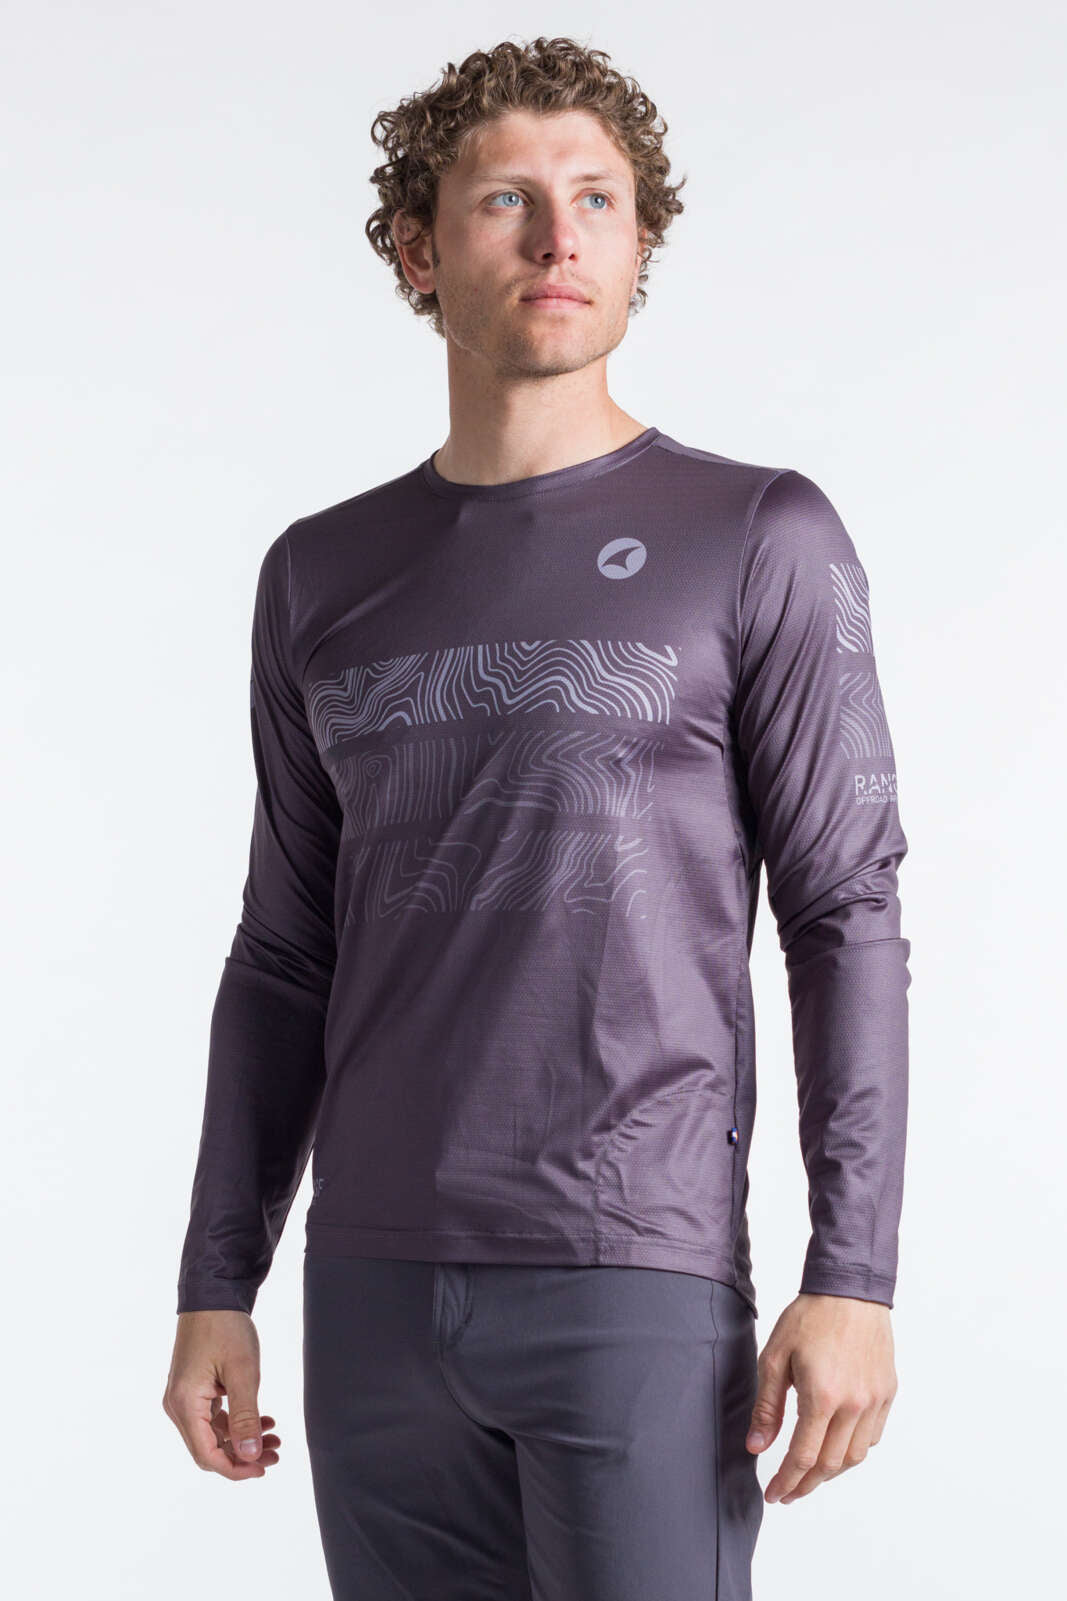 Men's Charcoal Long Sleeve MTB Jersey - Range Trail Front View